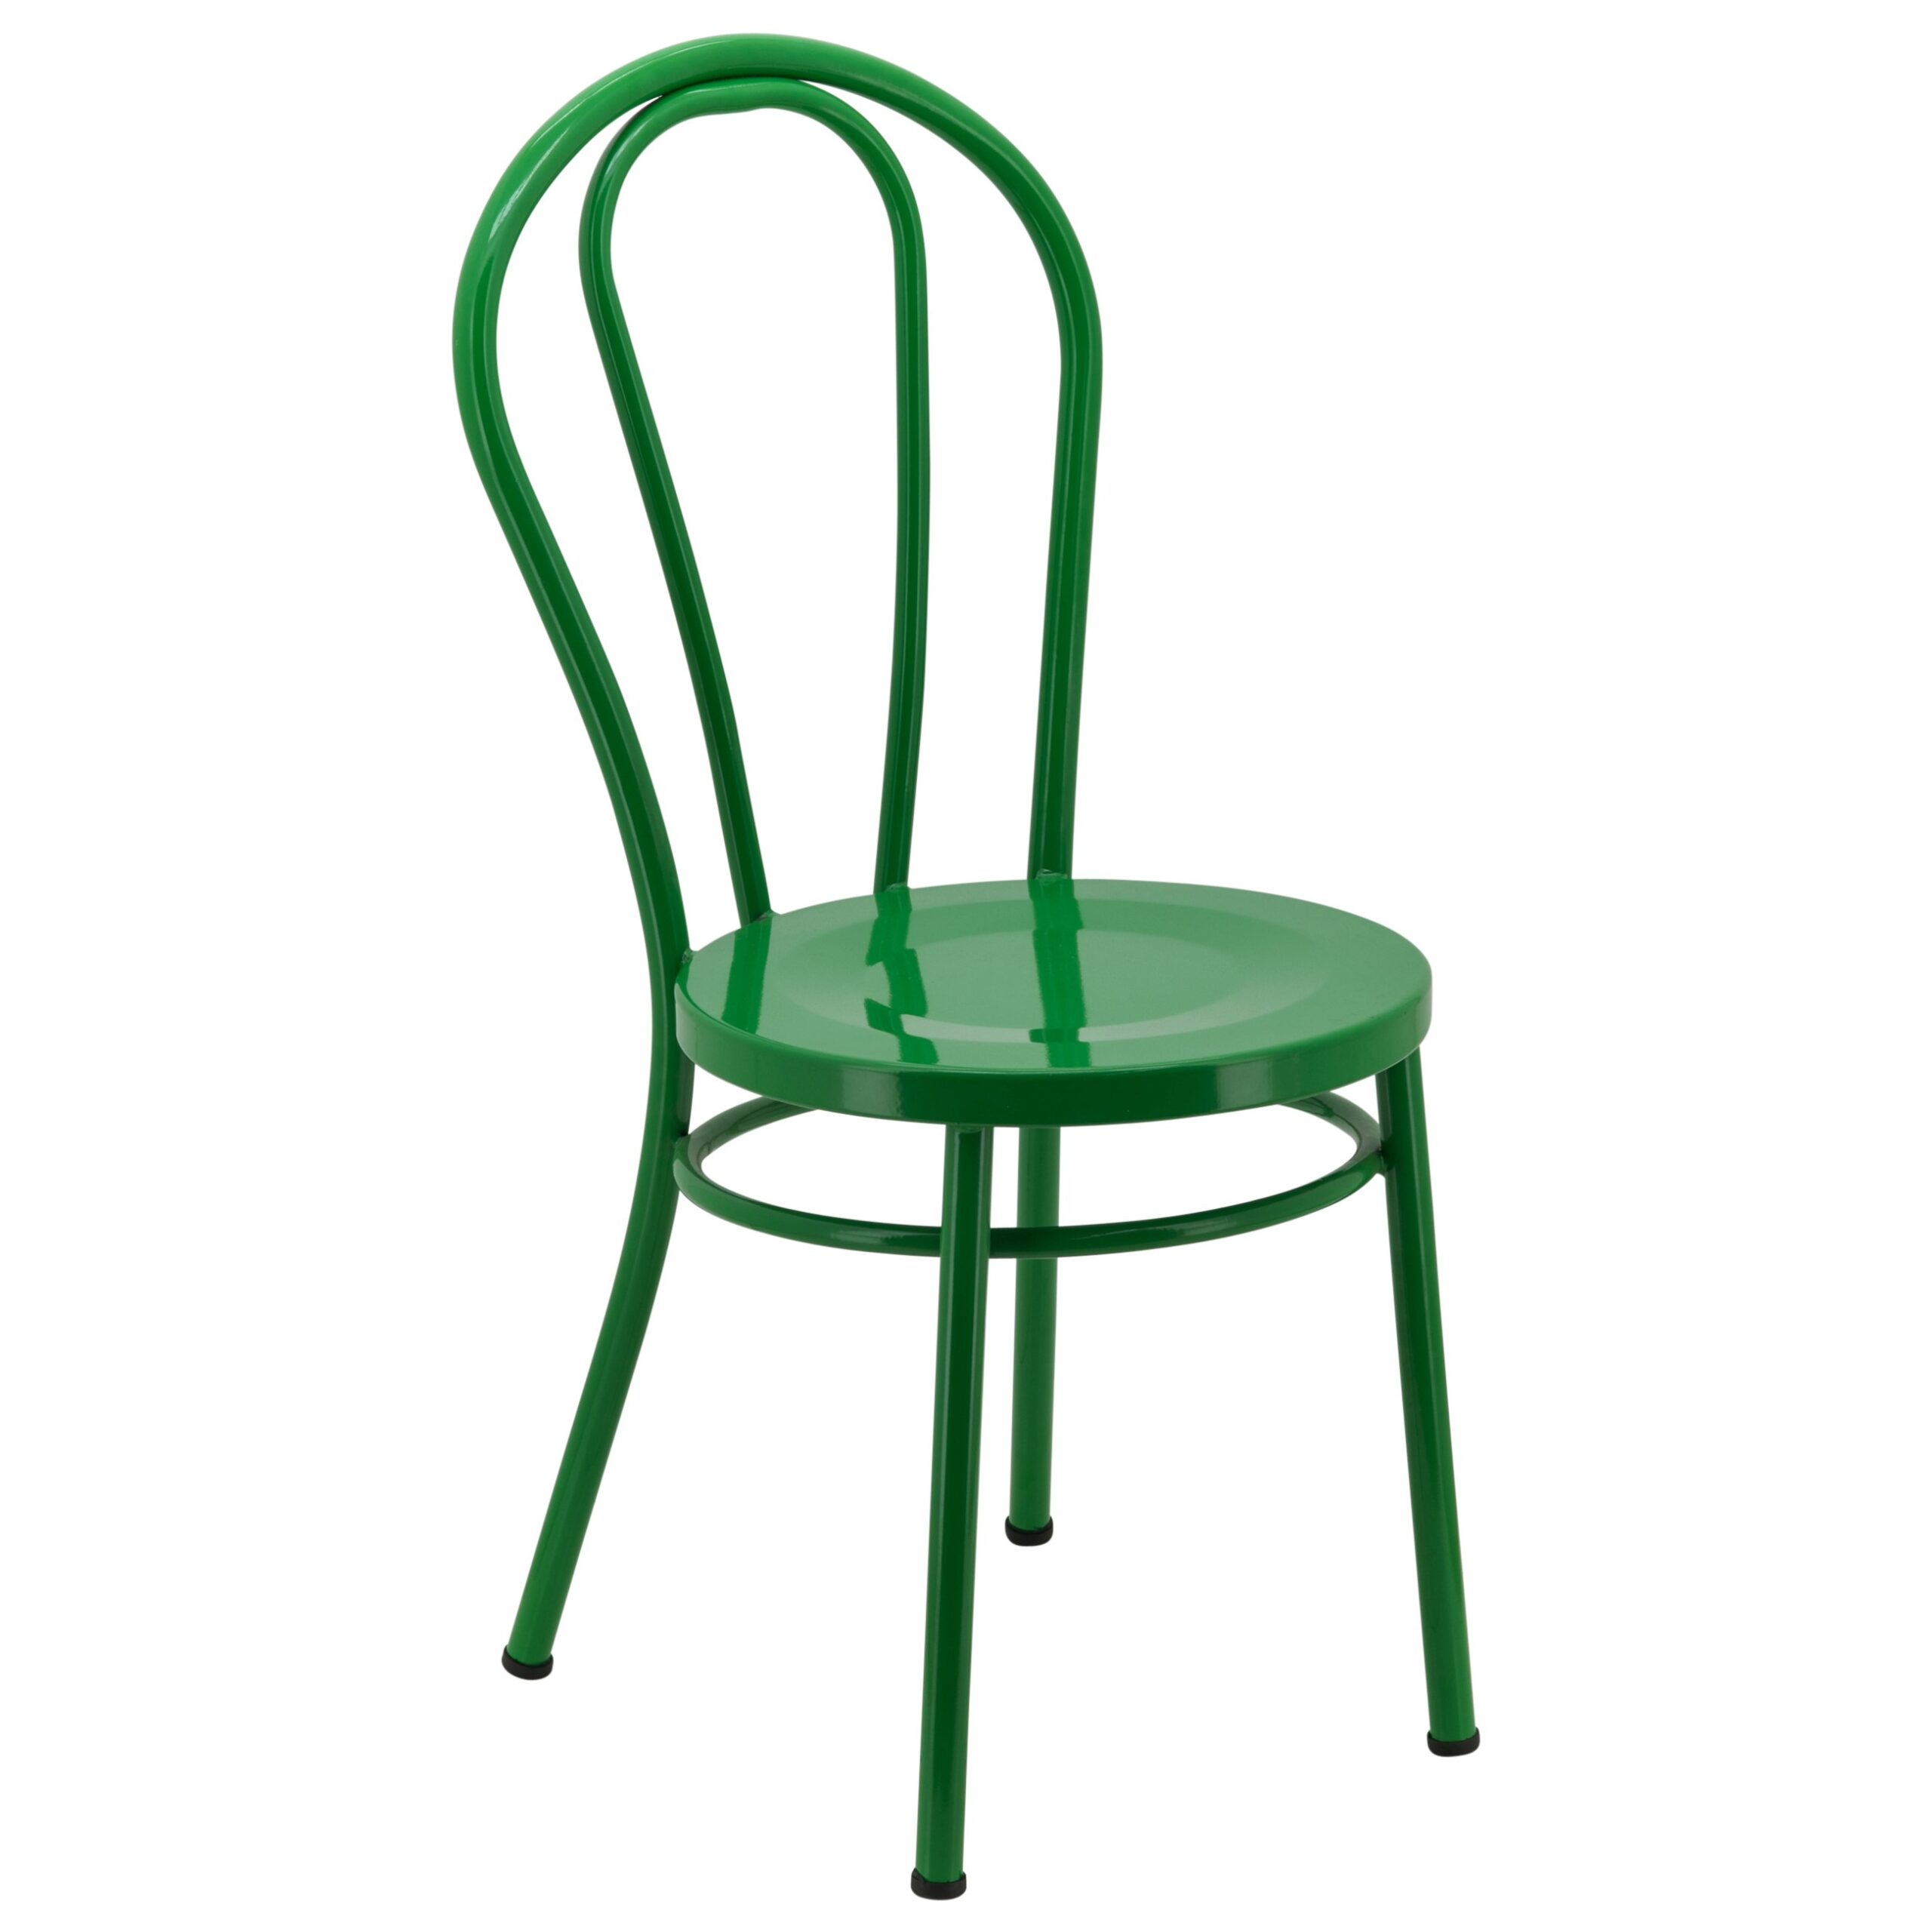 No.18 Steel Cabaret Chair in Gloss Forest Green